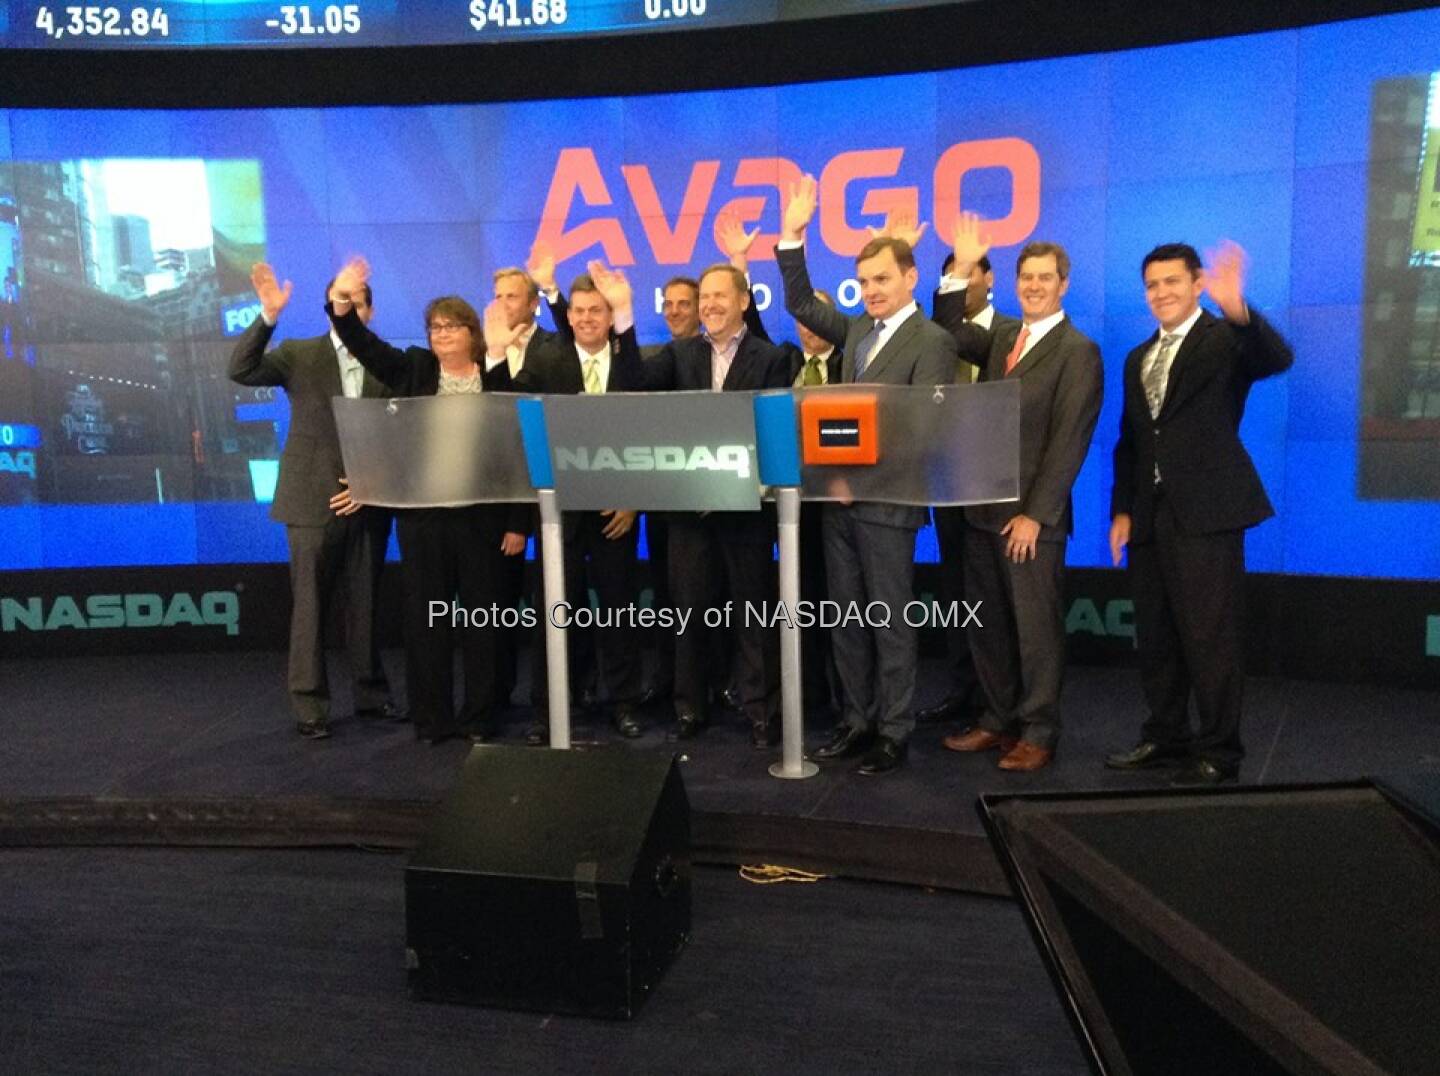 Avago Technologies celebrates their fifth anniversary of listing on #NASDAQ by ringing the Opening Bell $AVGO  Source: http://facebook.com/NASDAQ